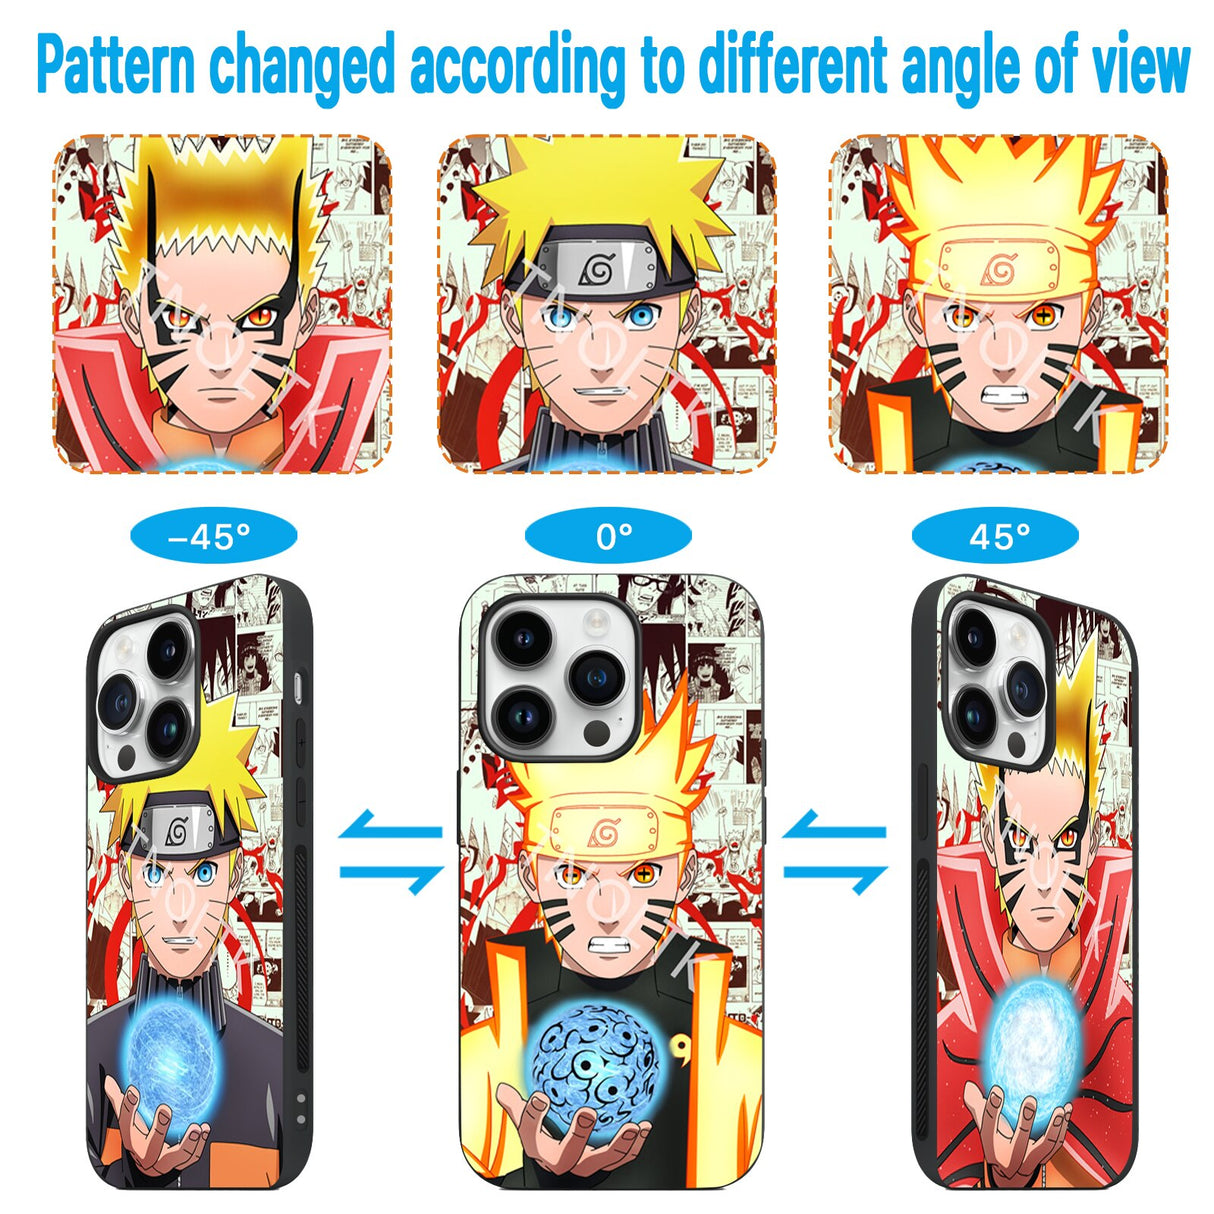 Naruto 3D Motion IPhone Case